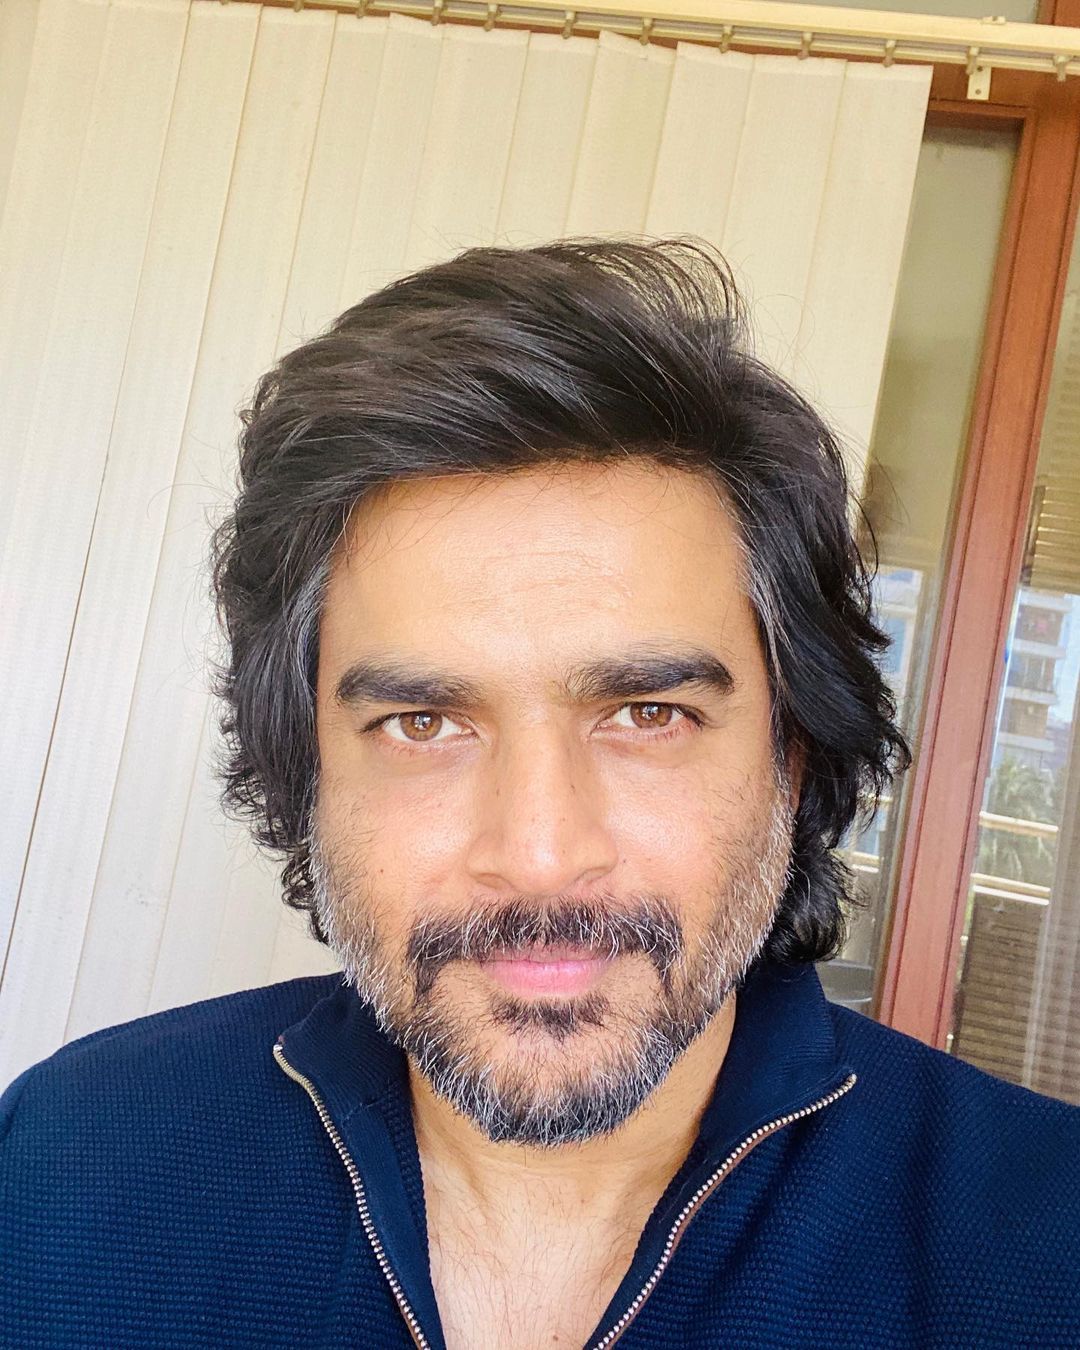 R Madhavan Finally Tests Negative For Covid-19 Along With His Family, Informs "We Are All Fit And Fine Now"